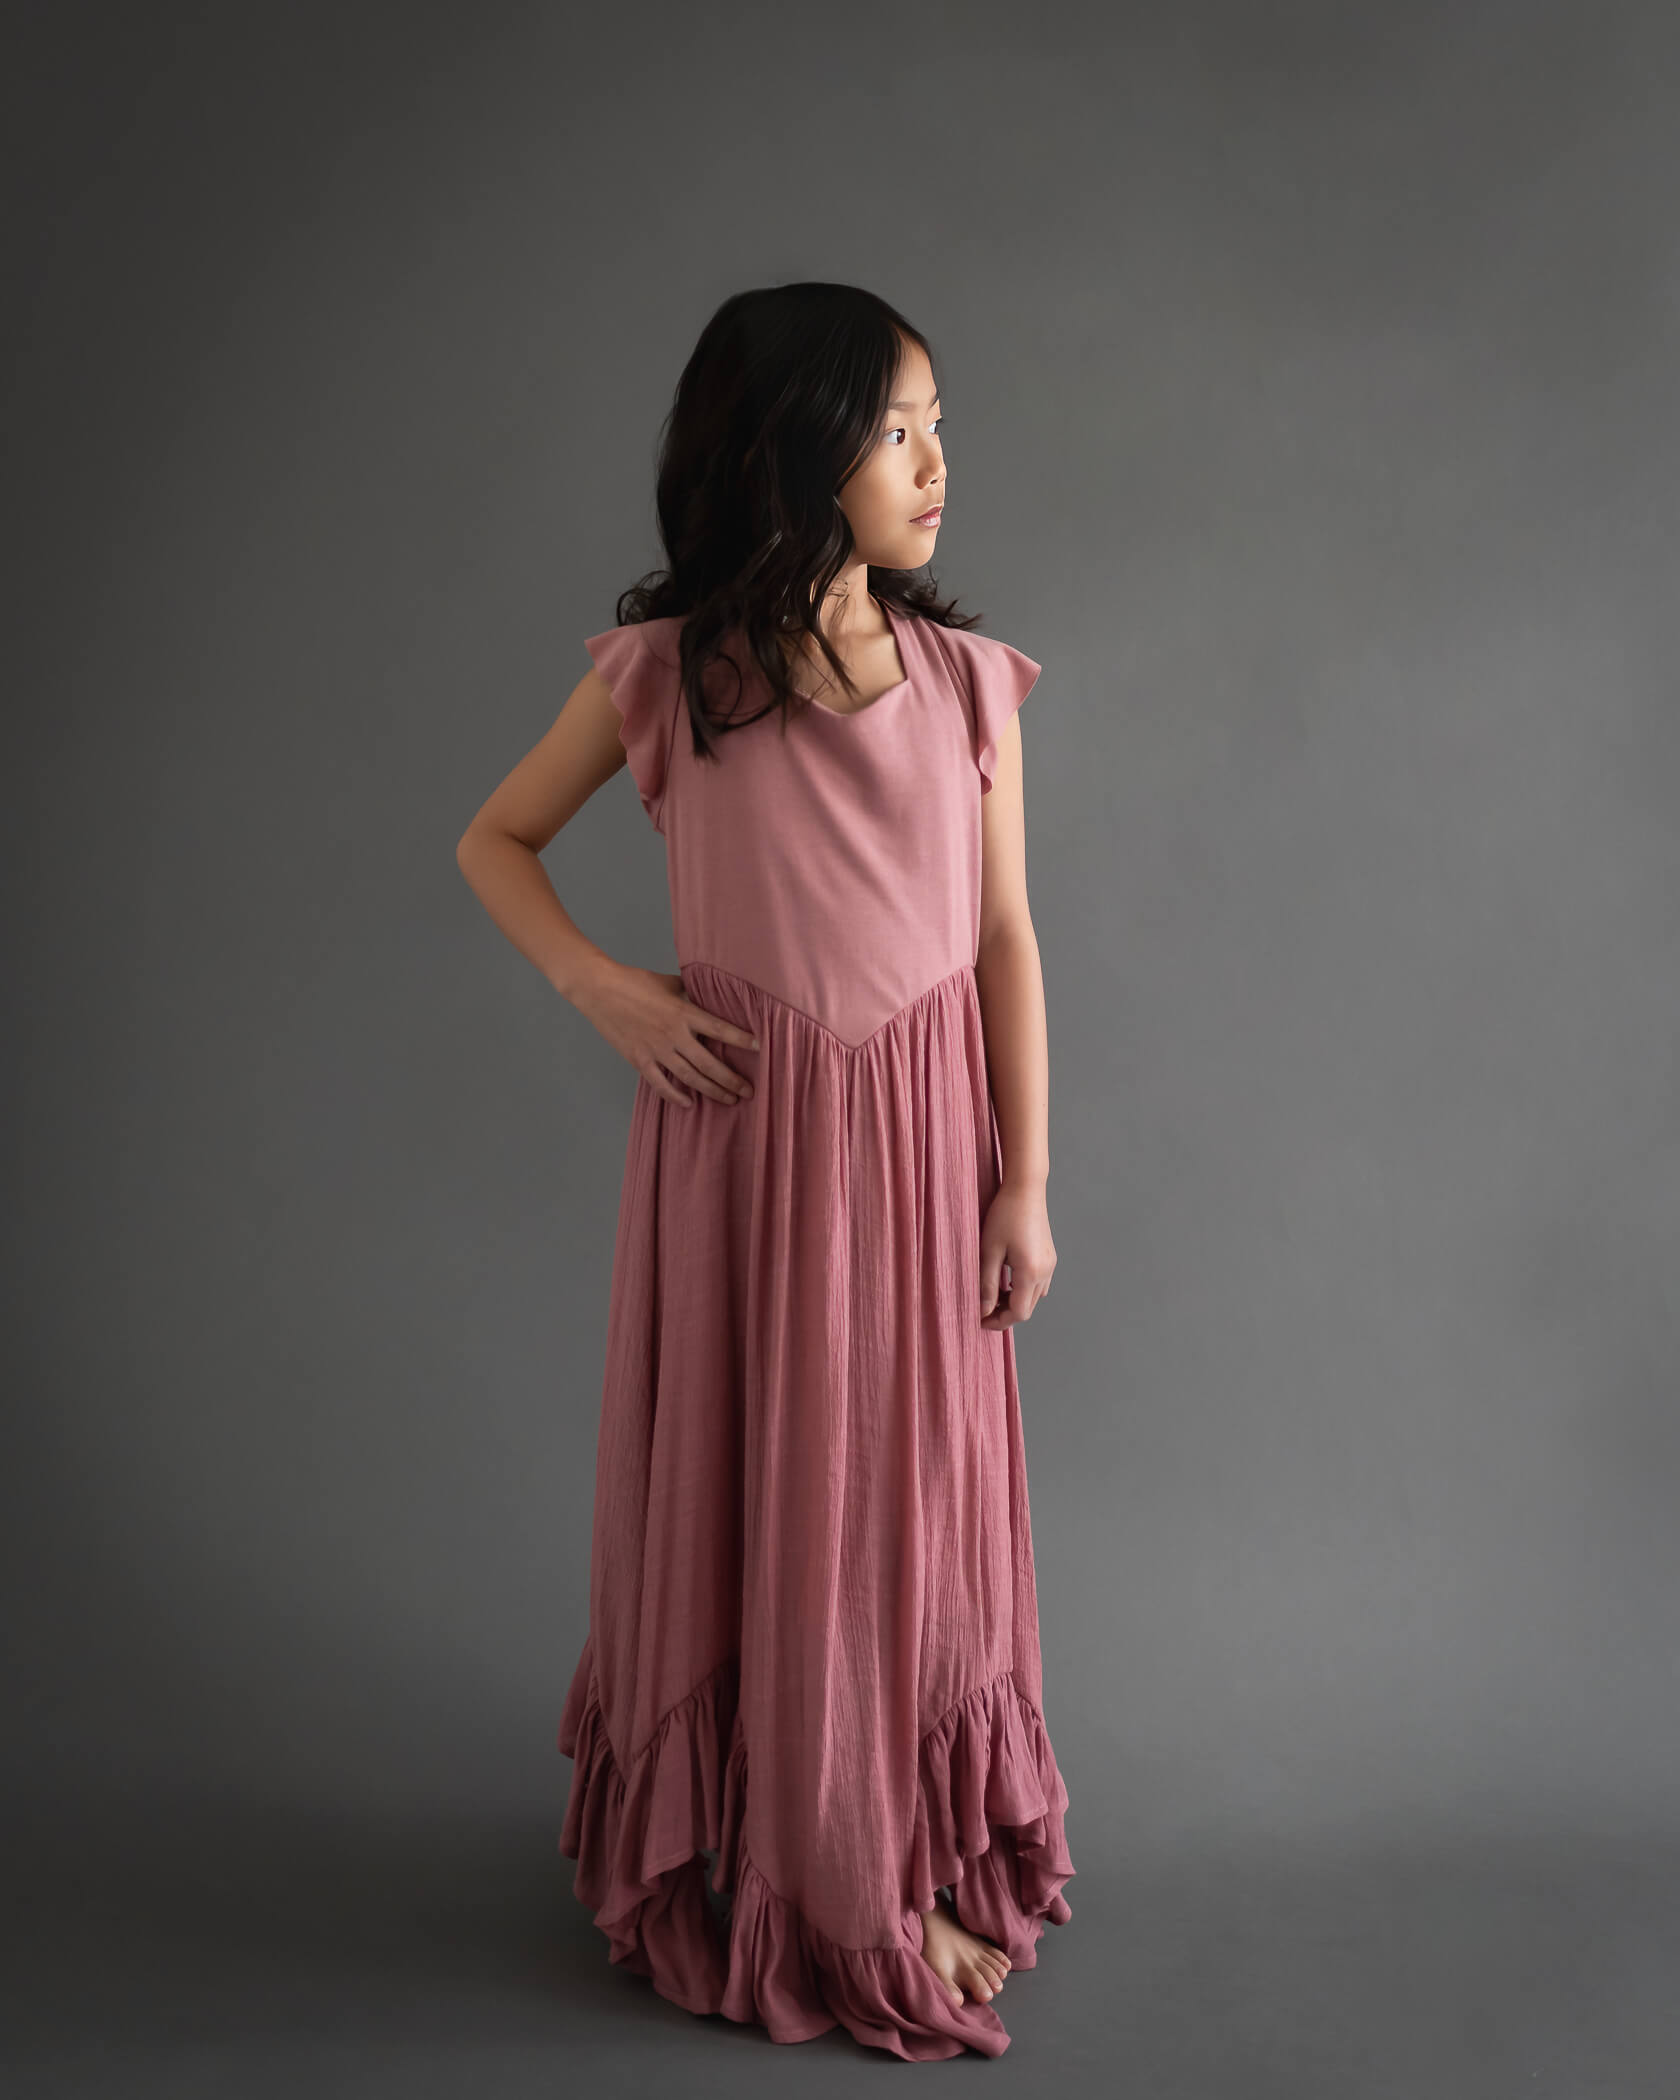 10 year old girl in long dress with hand on hip looking away